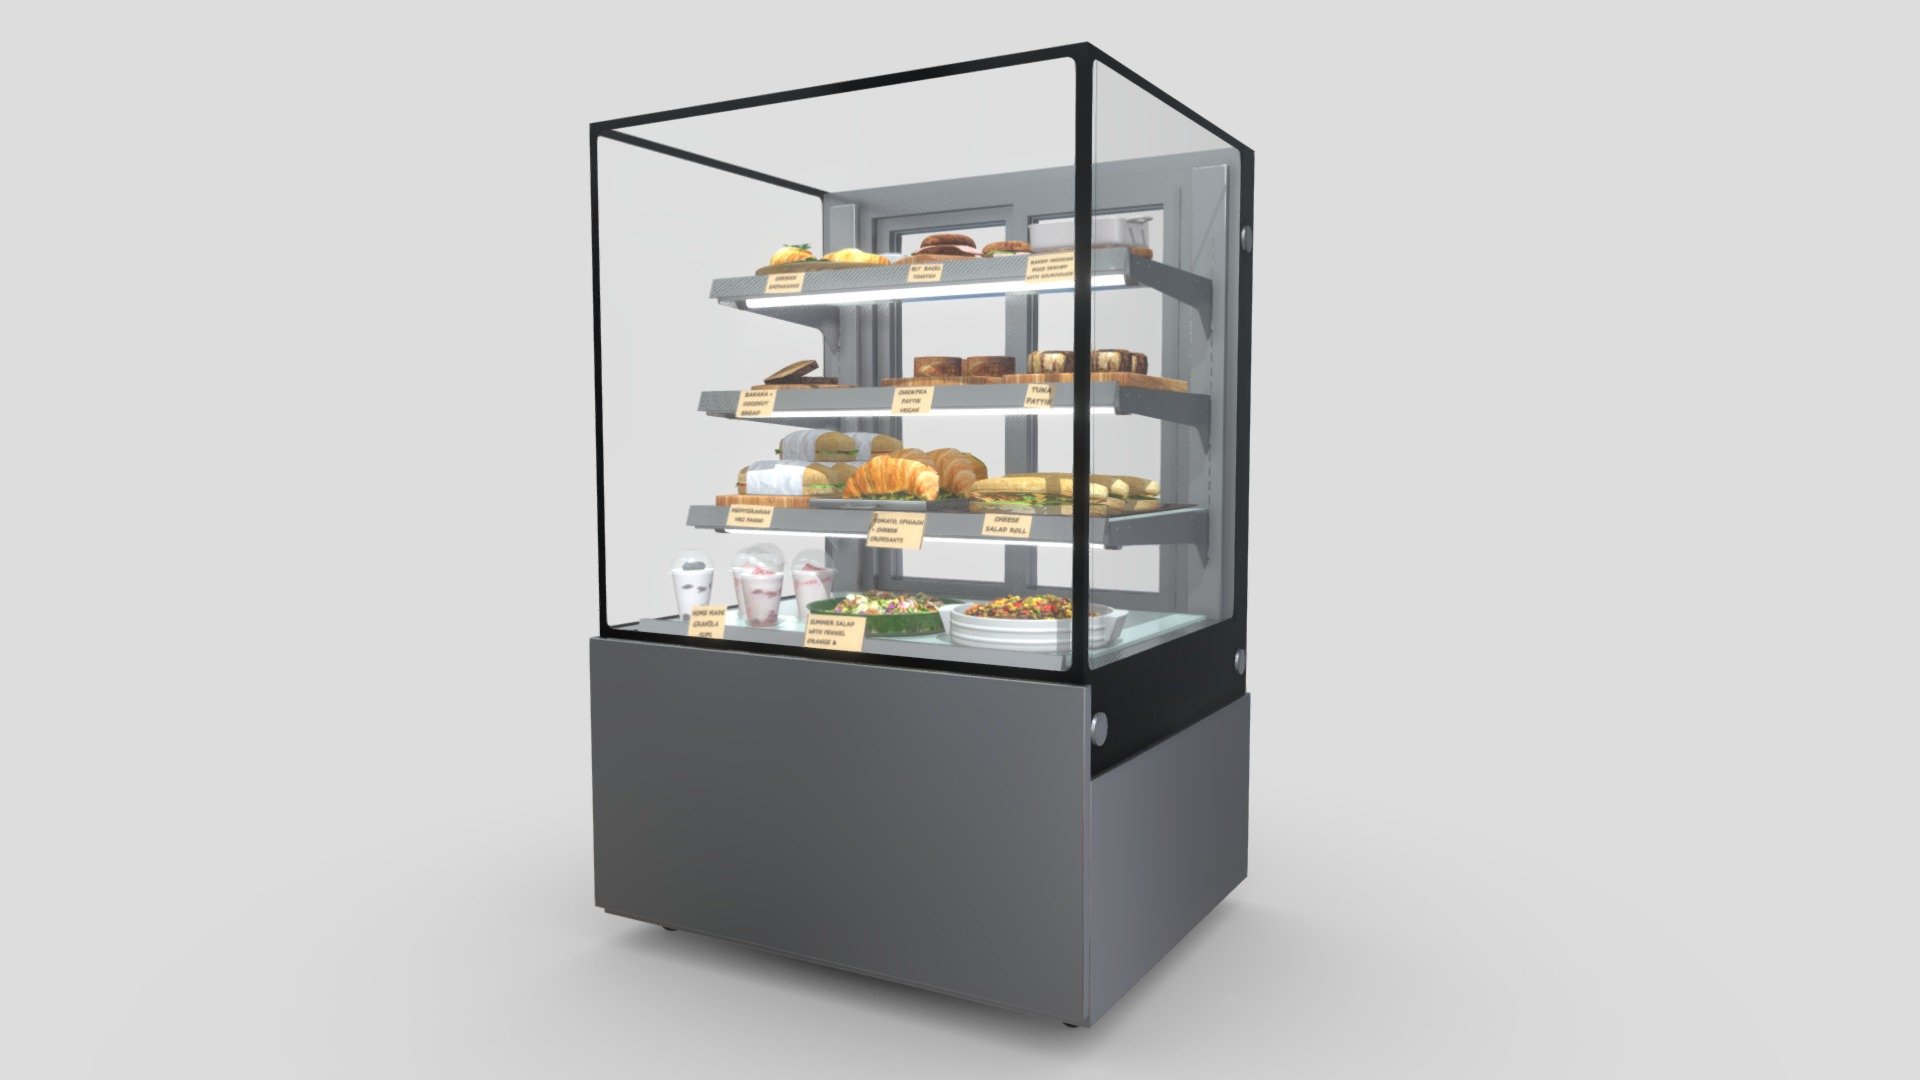 This model is a representation of a food showcase in a cafeteria called Little Olive Leaf Café located in Carawatha Park in Australia.
FD4T0900A | 4 Tier 900mm Ambient Food Display
Bromic FD4T0900A 900mm Ambient Food Display offers a stylish, purpose-built solution for displaying cakes and delicacies at ambient temperature.
 beautiful stainless steel finish offers a modern, sophisticated look that would complement any interior decor.

DIMENSIONS
W900mm x D740mm x H1360mm
VOLUME
417L

this showcase contains 11 food dishes
chicken empanadas
Blt bagels toasted
Baked mexican eggs served with sourdough
Banana + coconut bread
Chickpea pattie vegan
Tuna pattie
Tomato spincach + cheese croissant
Mediteran veg panini
Cheese salad roll
home made granola cups
Summer salad with fennel orange &amp; sunflower seeds - Bromic Ambient Food Display 90 cm - Buy Royalty Free 3D model by raptor3 3d model